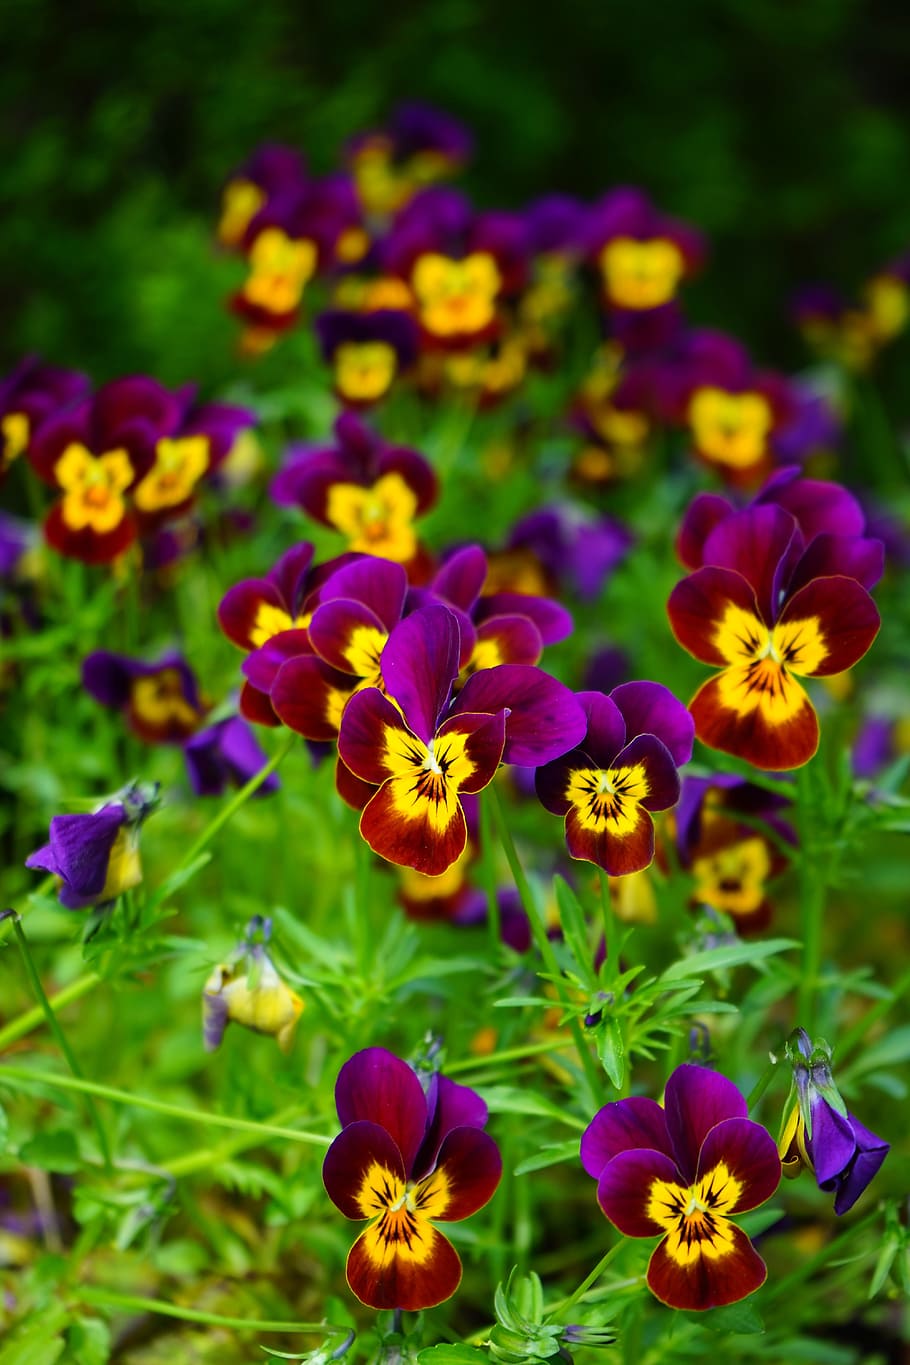 Pansy, Flower, Blossom, Bloom, Yellow, violet, viola, violaceae, colorful, color